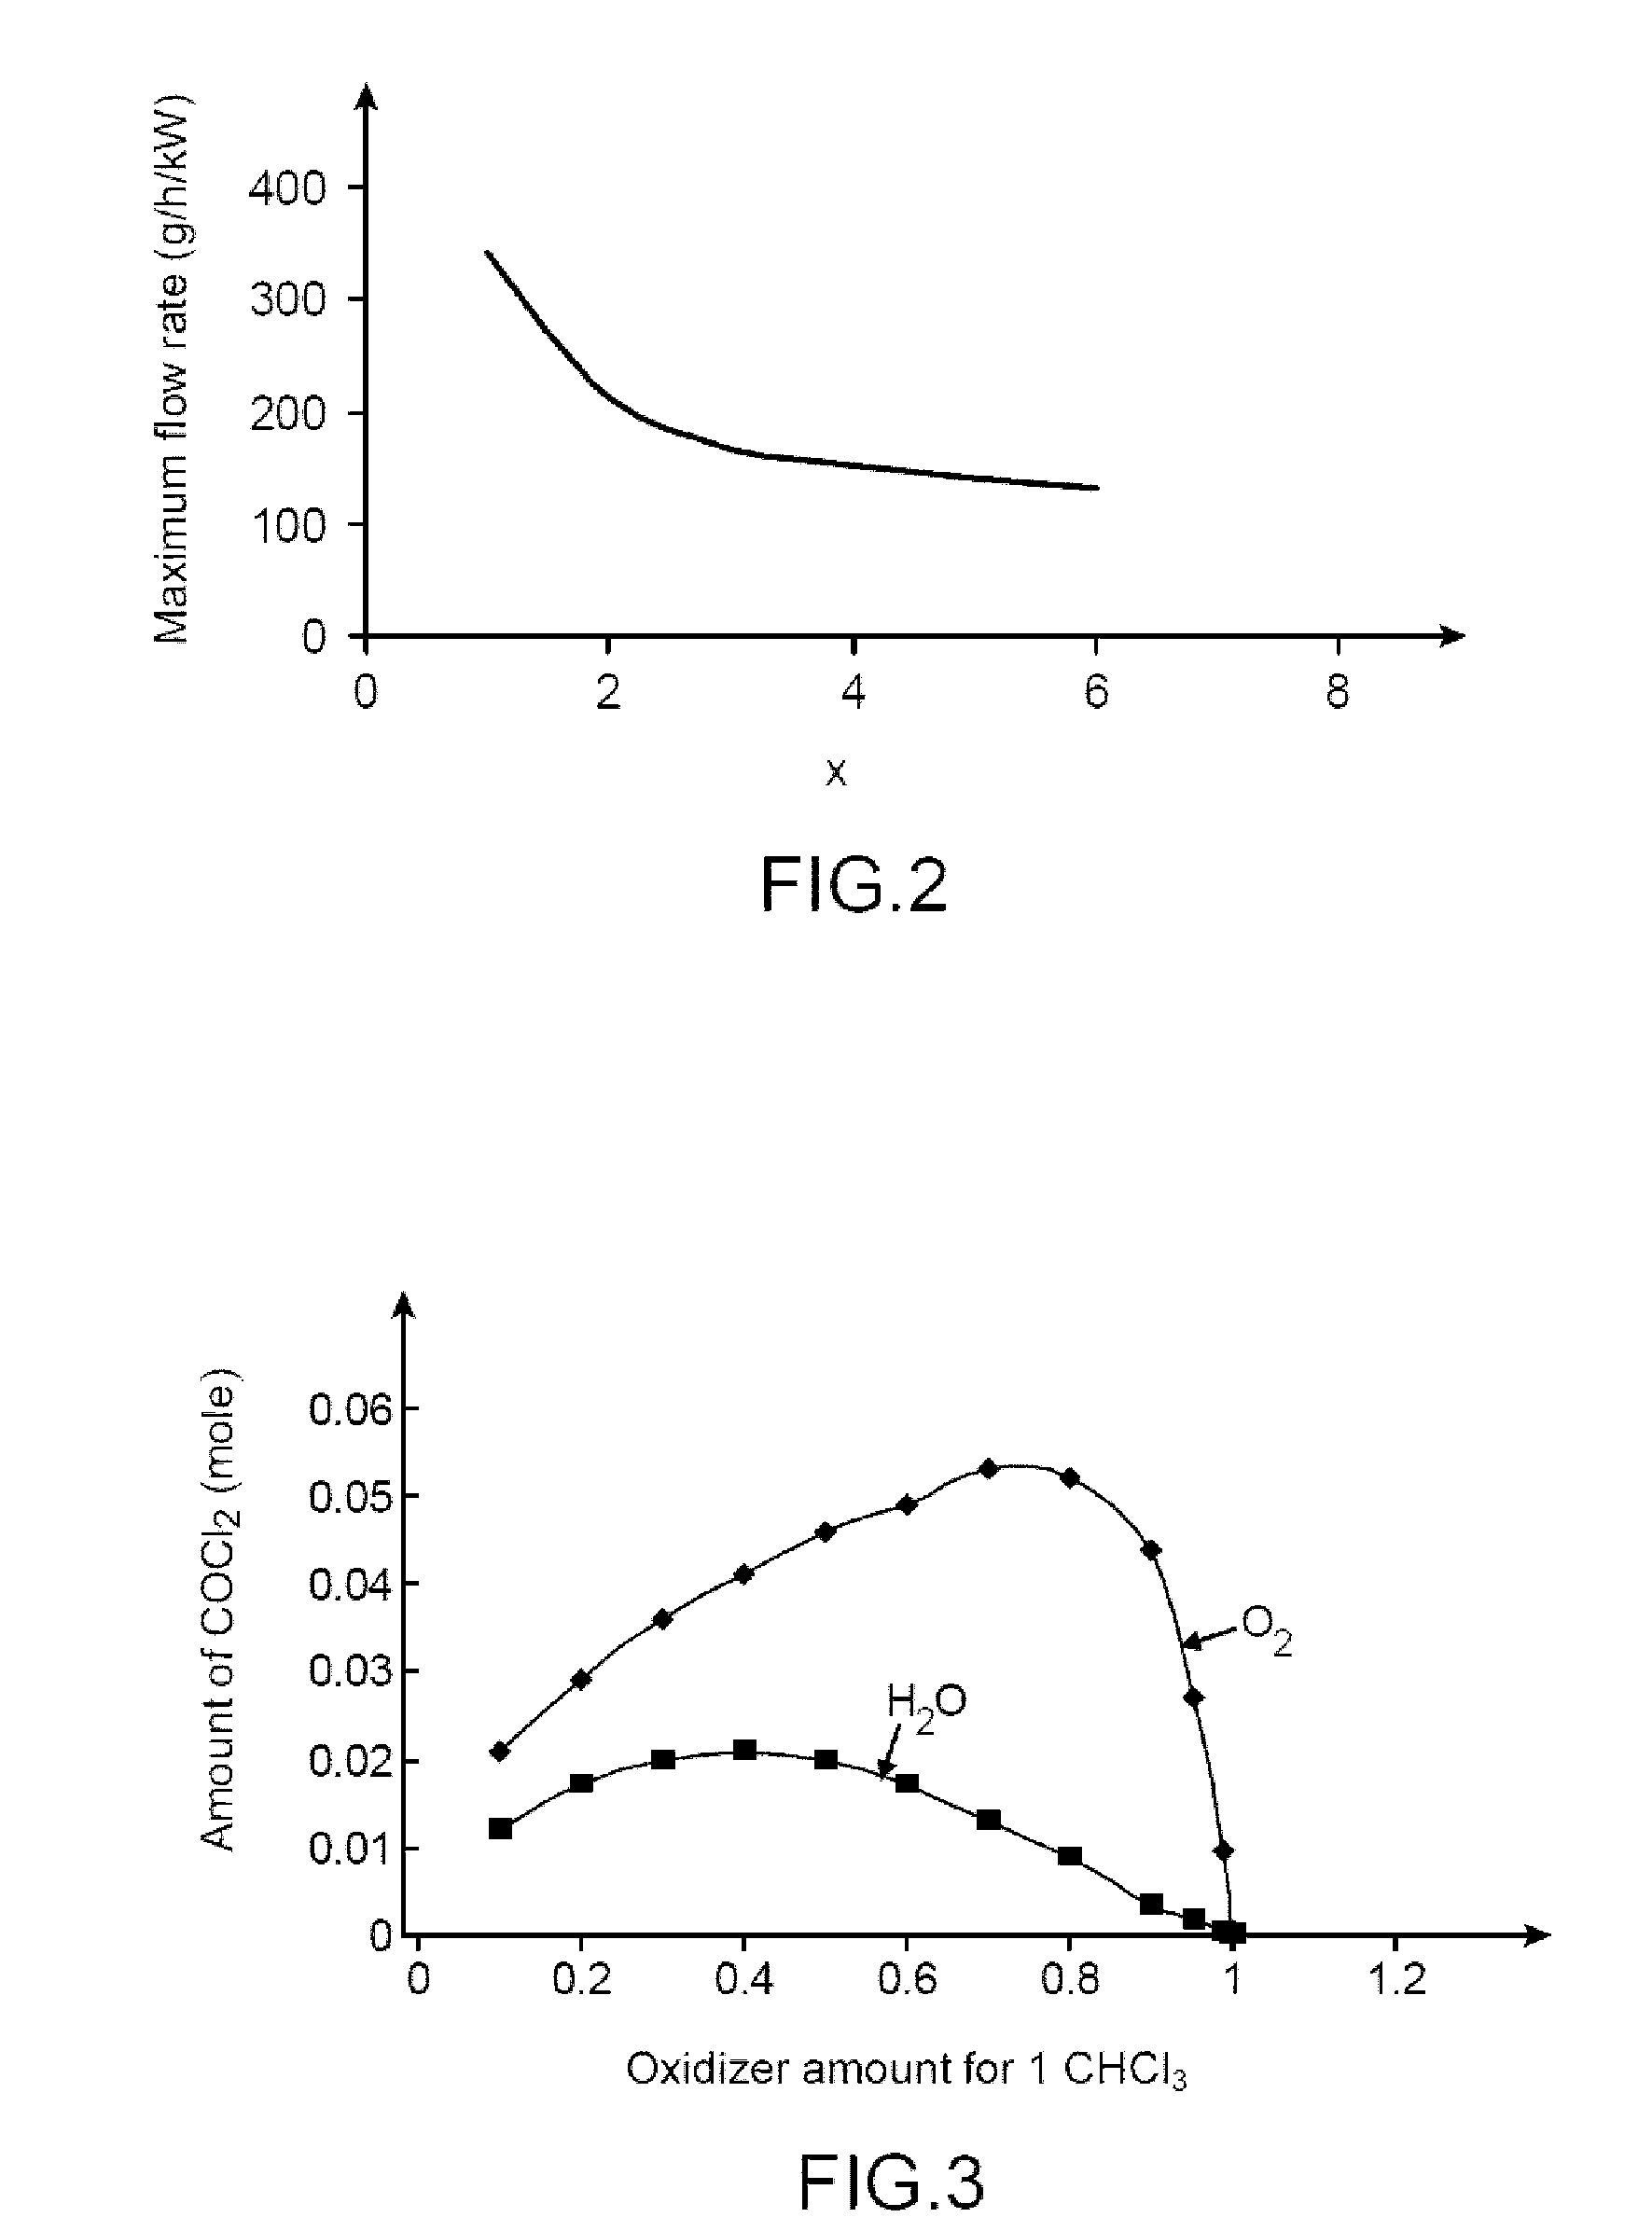 Method and device for thermal destruction of organic compounds by an induction plasma